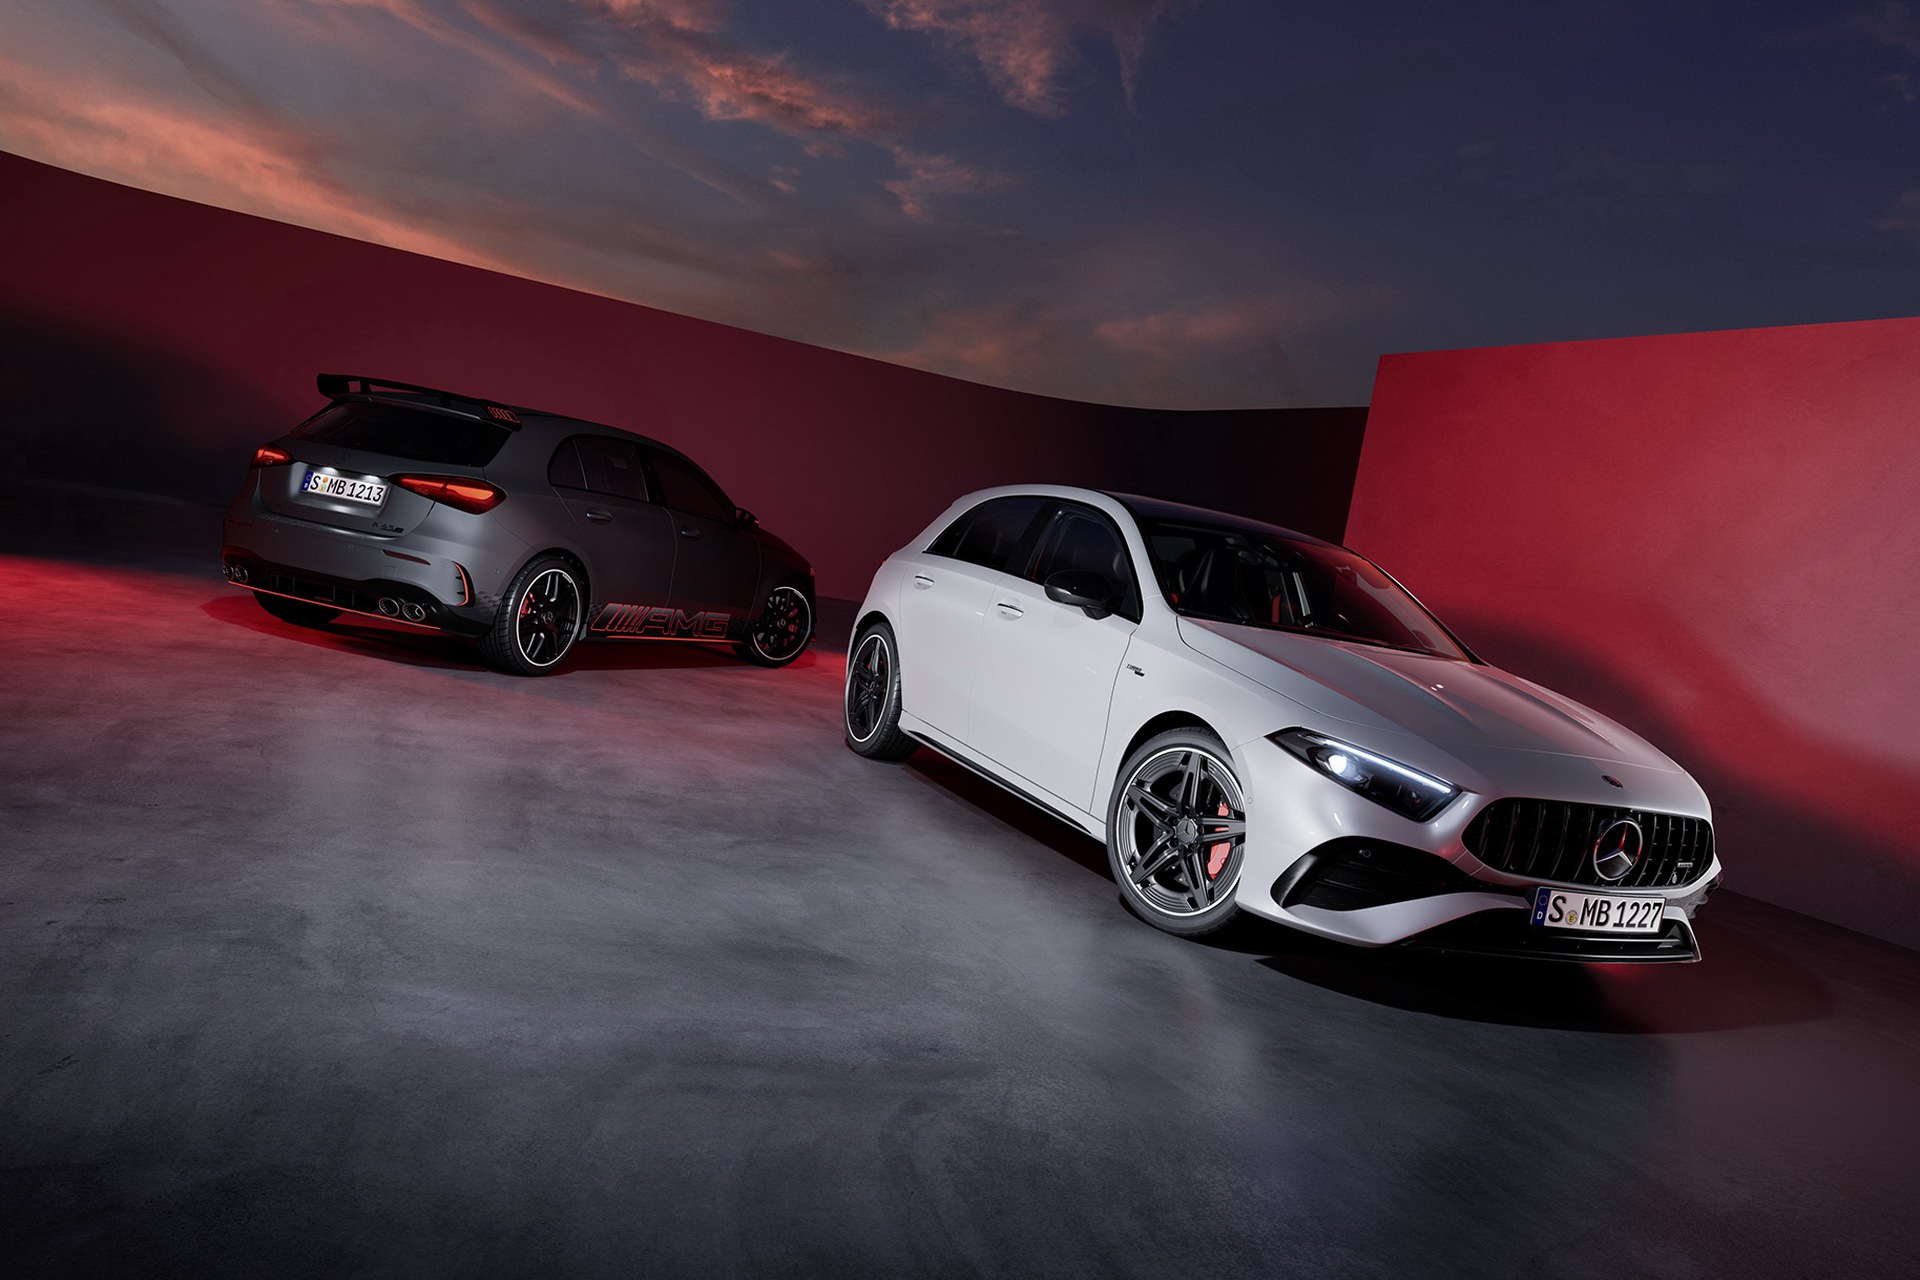 Nuove AMG restyling